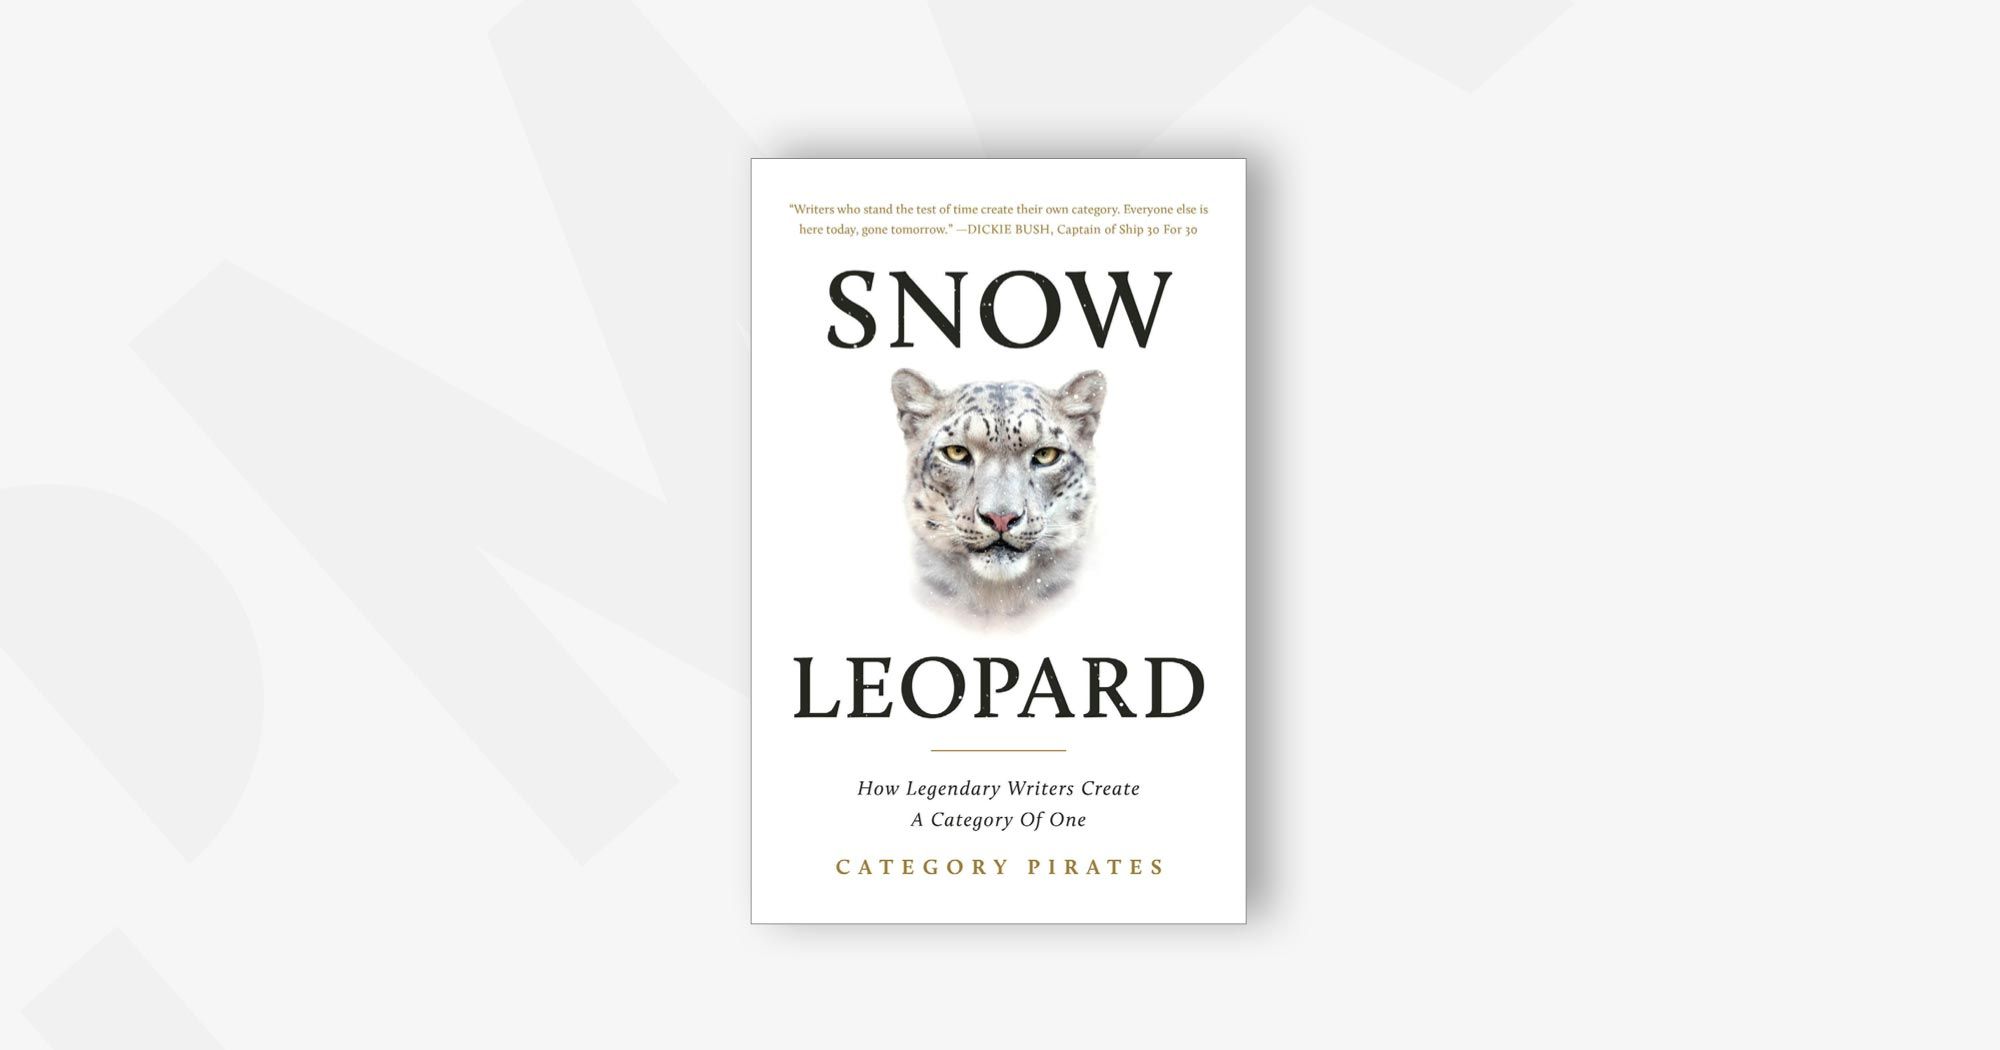 Snow Leopard: How Legendary Writers Create A Category Of One – Category Pirates, Christopher Lochhead, Eddie Yoon, and Nicolas Cole